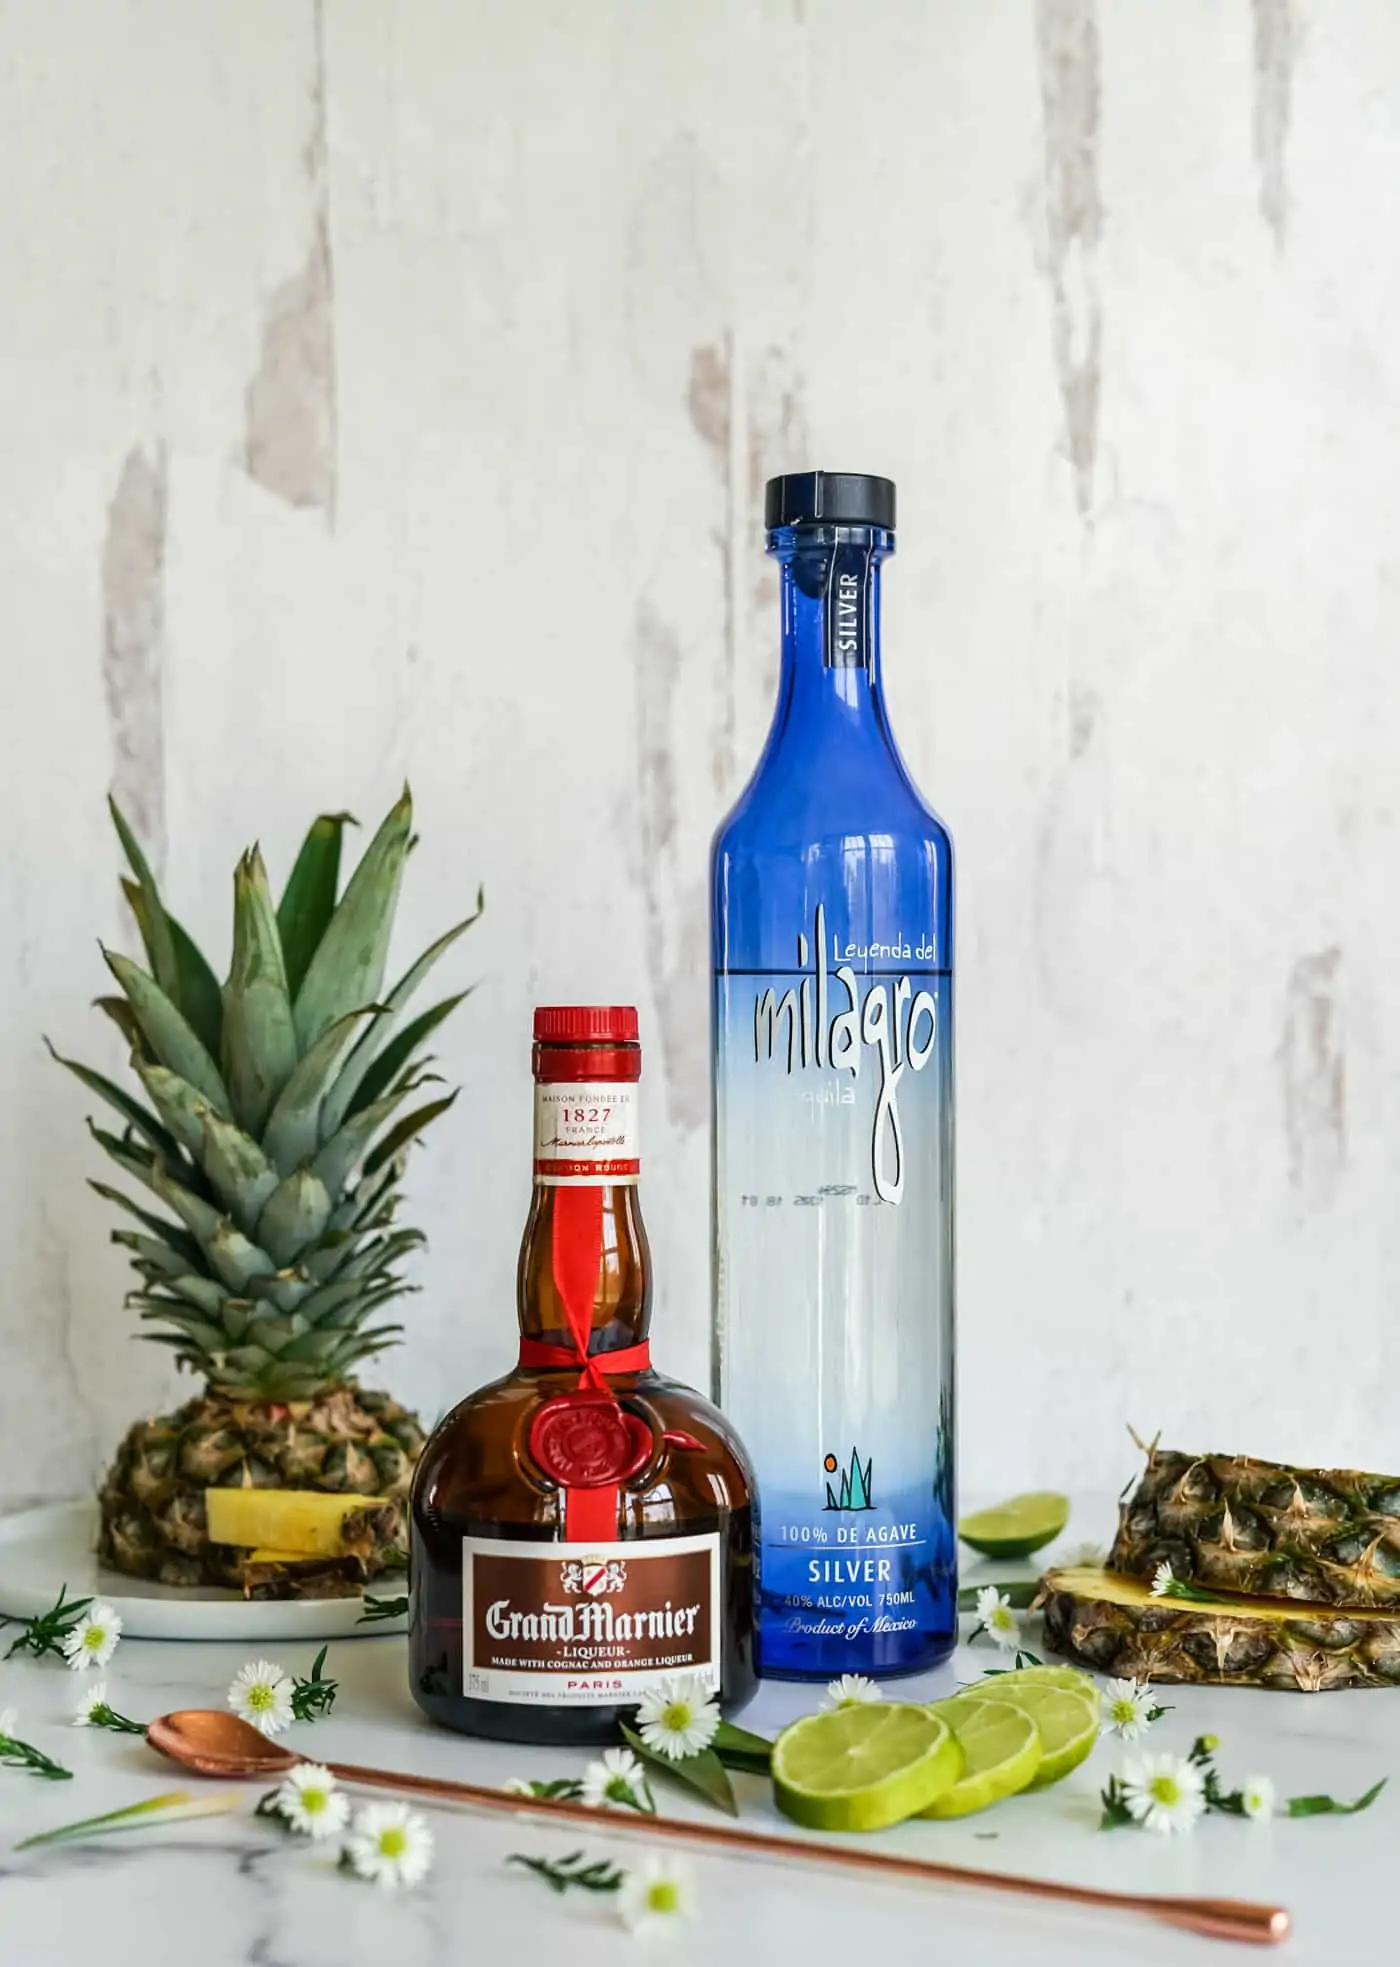 A bottle of Grand Marnier and Milagro silver tequila 